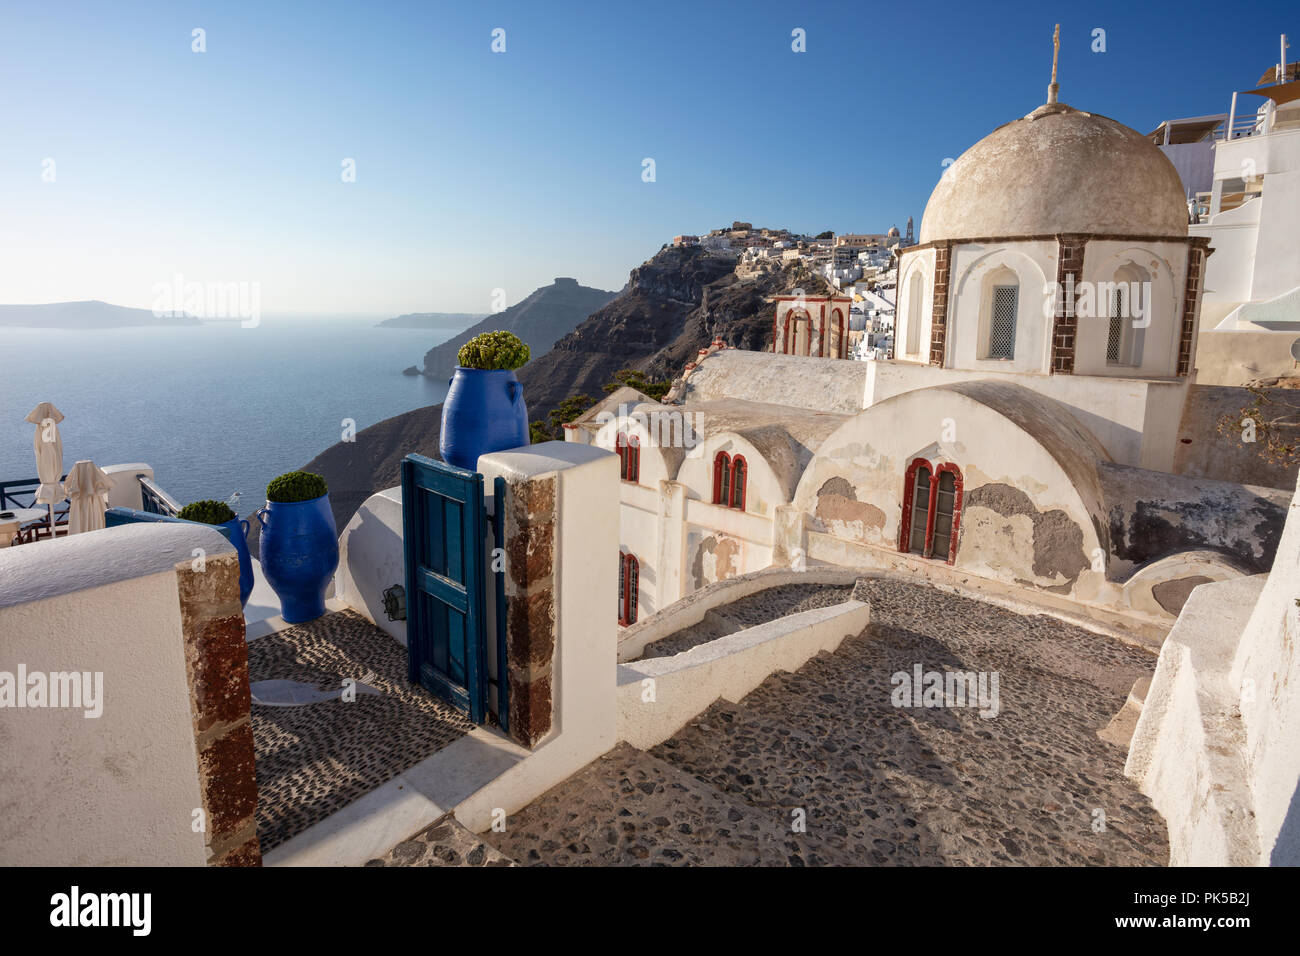 Thira, Santorini. Image of famous village Thira located at one of Cyclades island of Santorini, South Aegean, Greece. Stock Photo